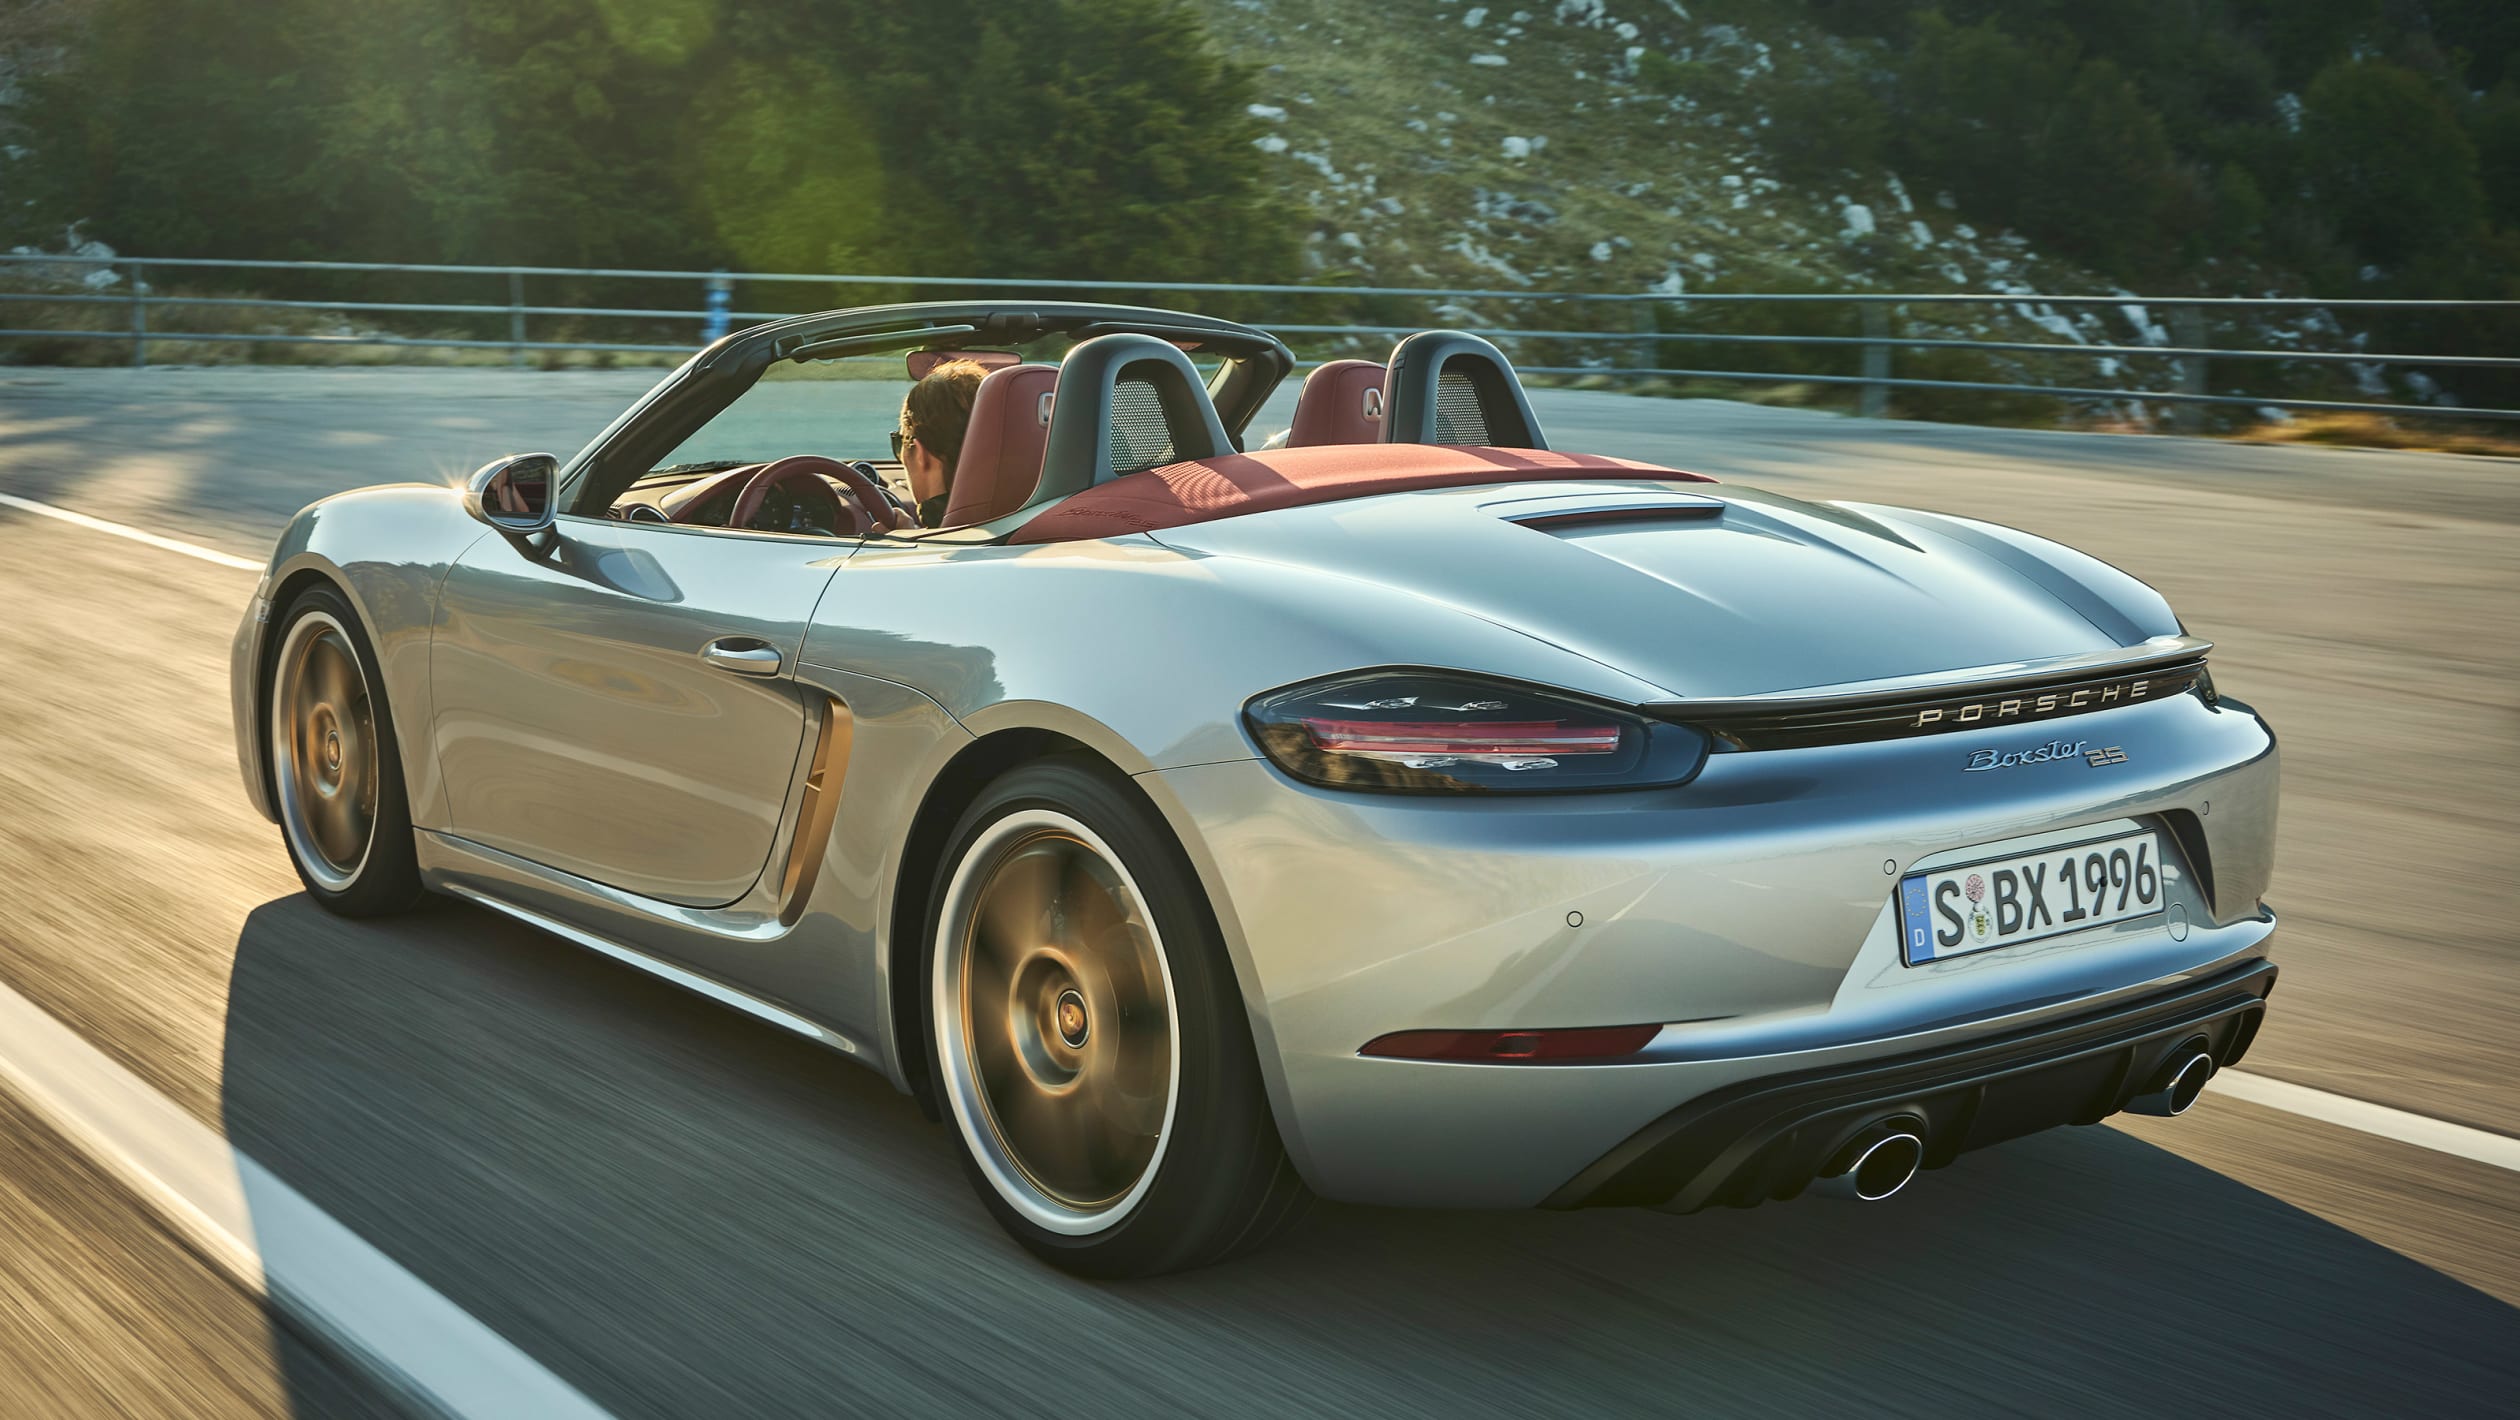 Porsche Boxster 25 Years limited edition confirmed for Australia